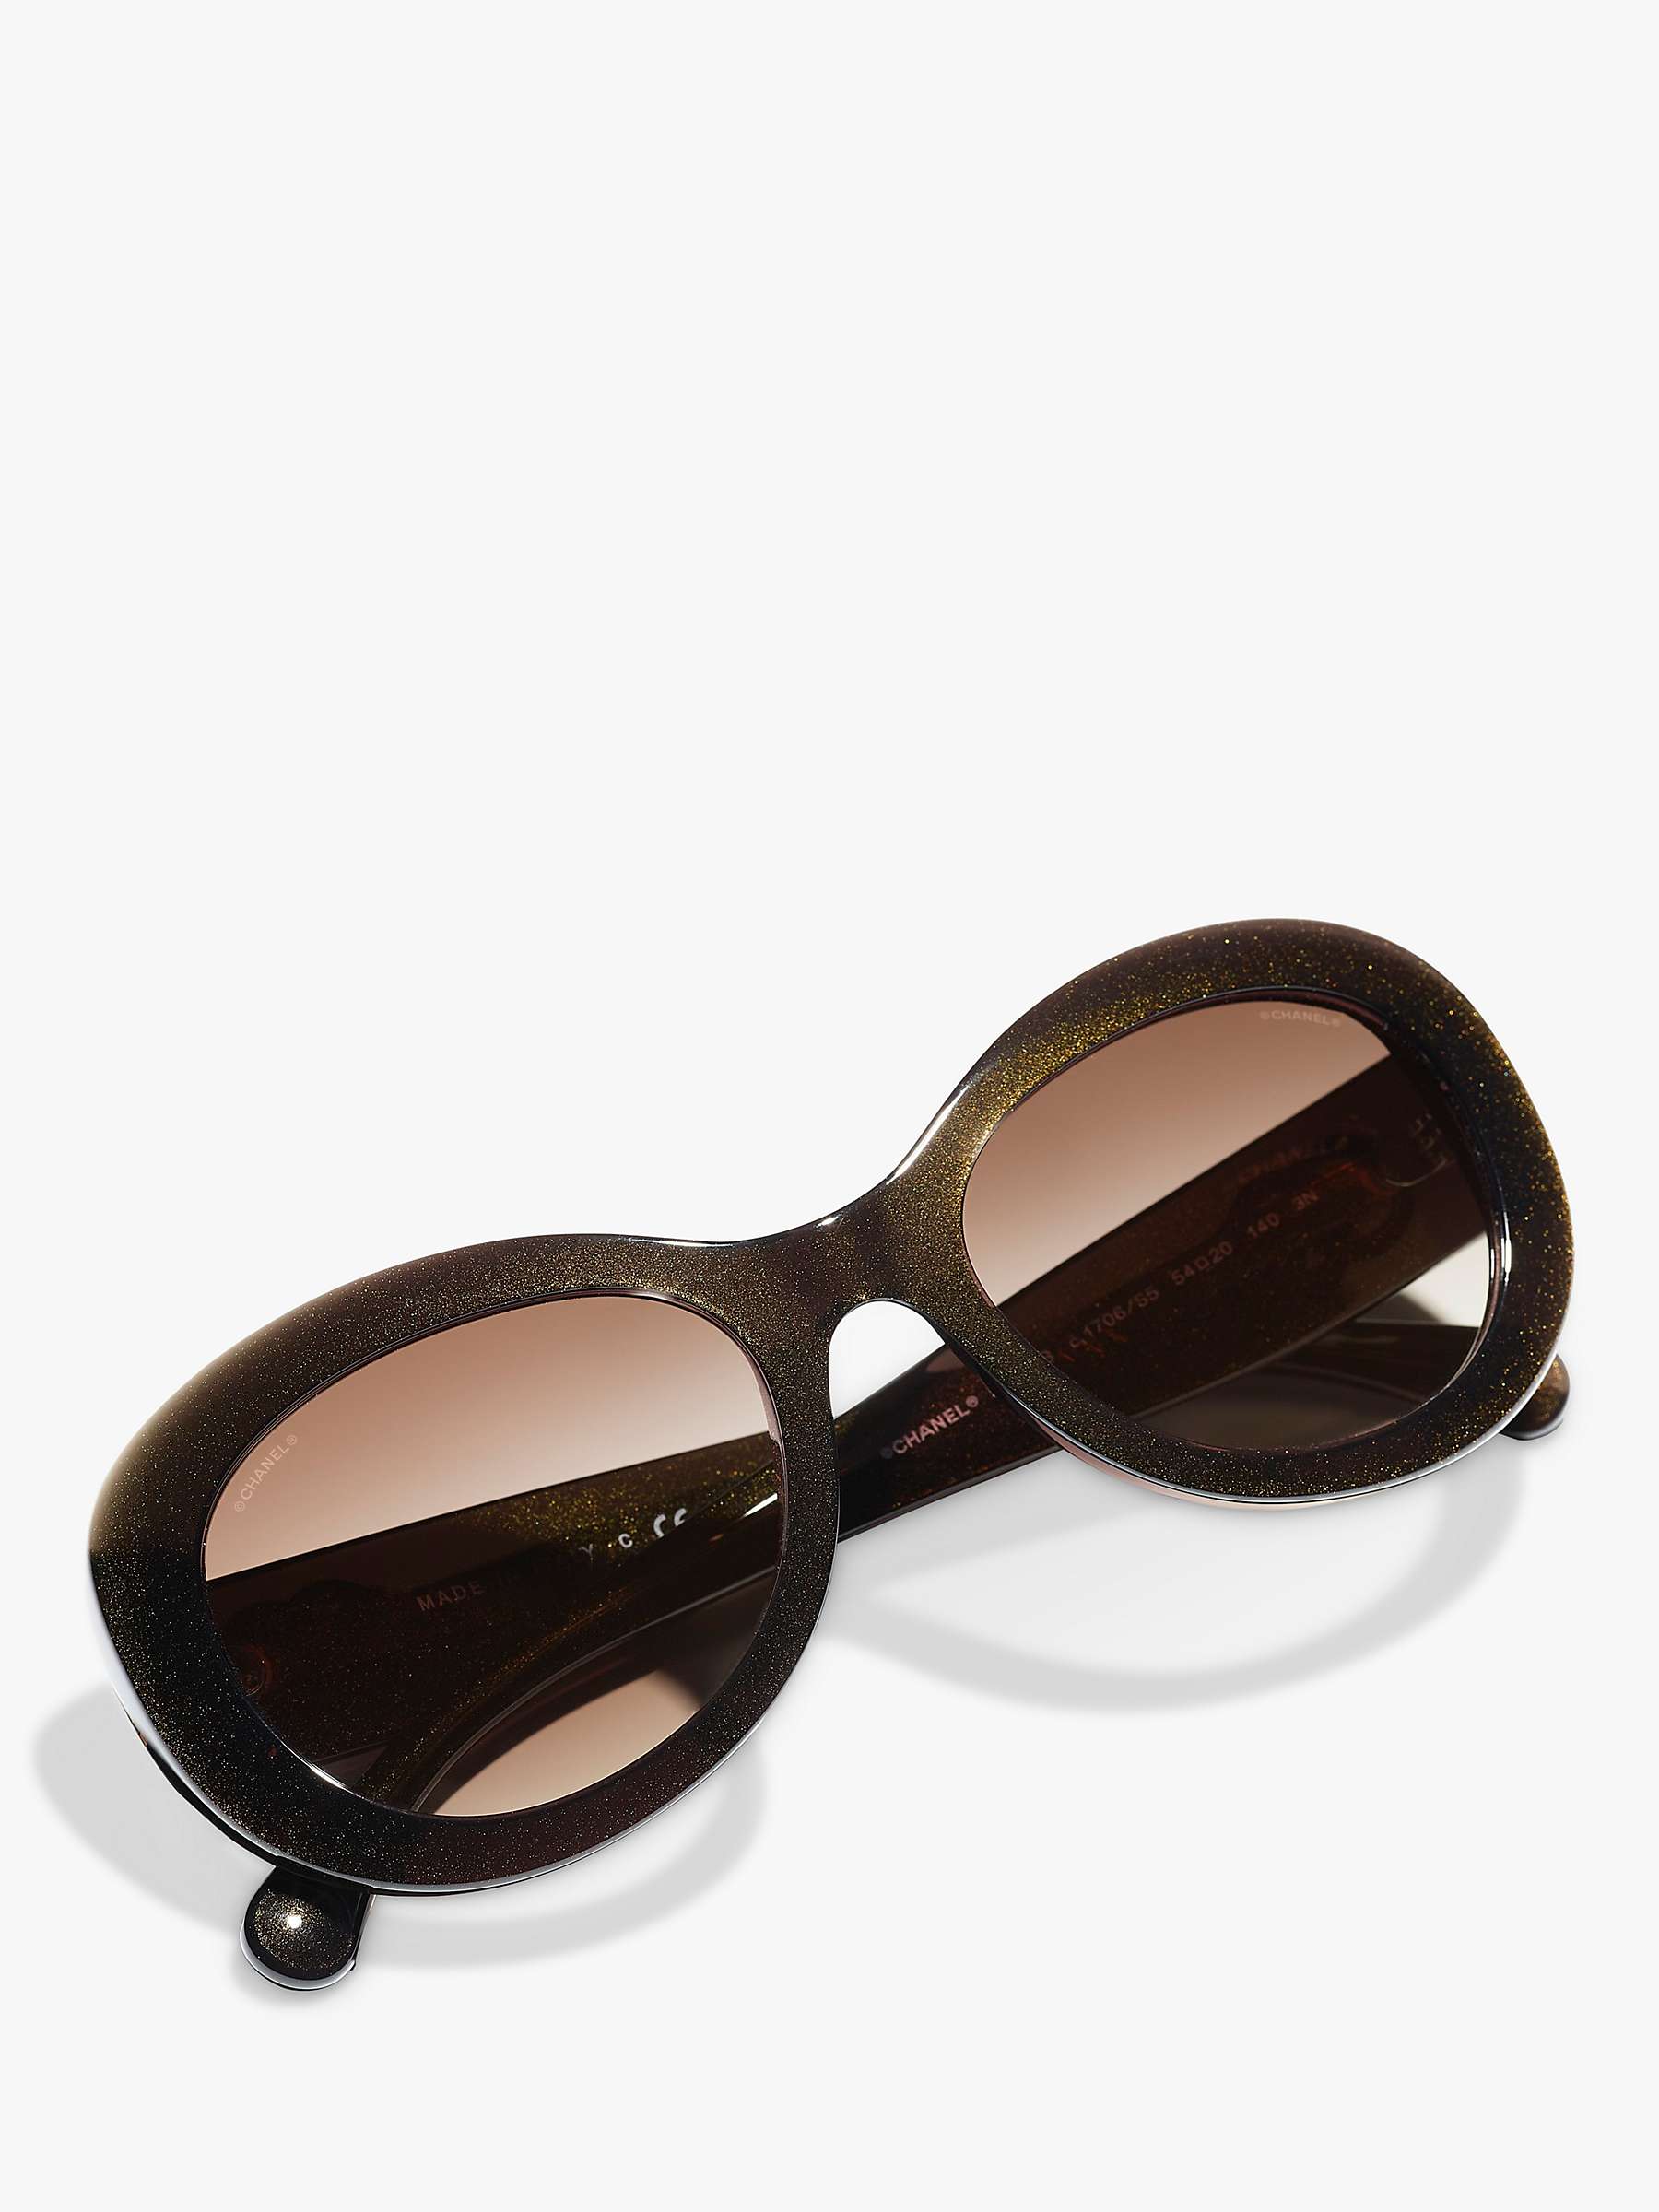 Buy CHANEL Oval Sunglasses CH5469B Iridescent Brown/Brown Gradient Online at johnlewis.com